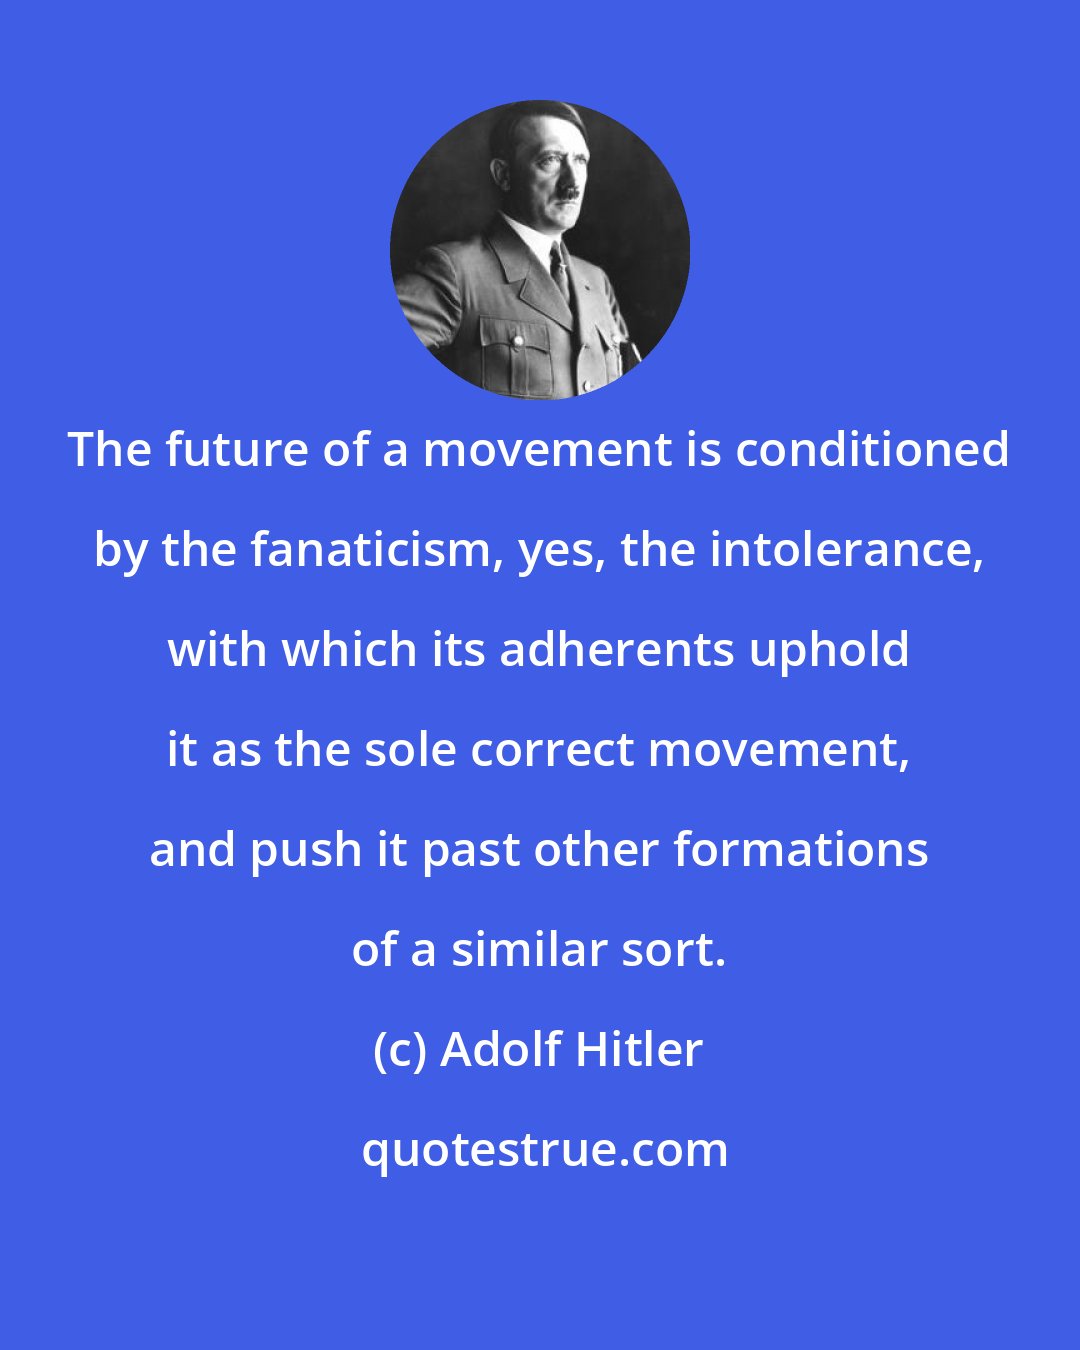 Adolf Hitler: The future of a movement is conditioned by the fanaticism, yes, the intolerance, with which its adherents uphold it as the sole correct movement, and push it past other formations of a similar sort.